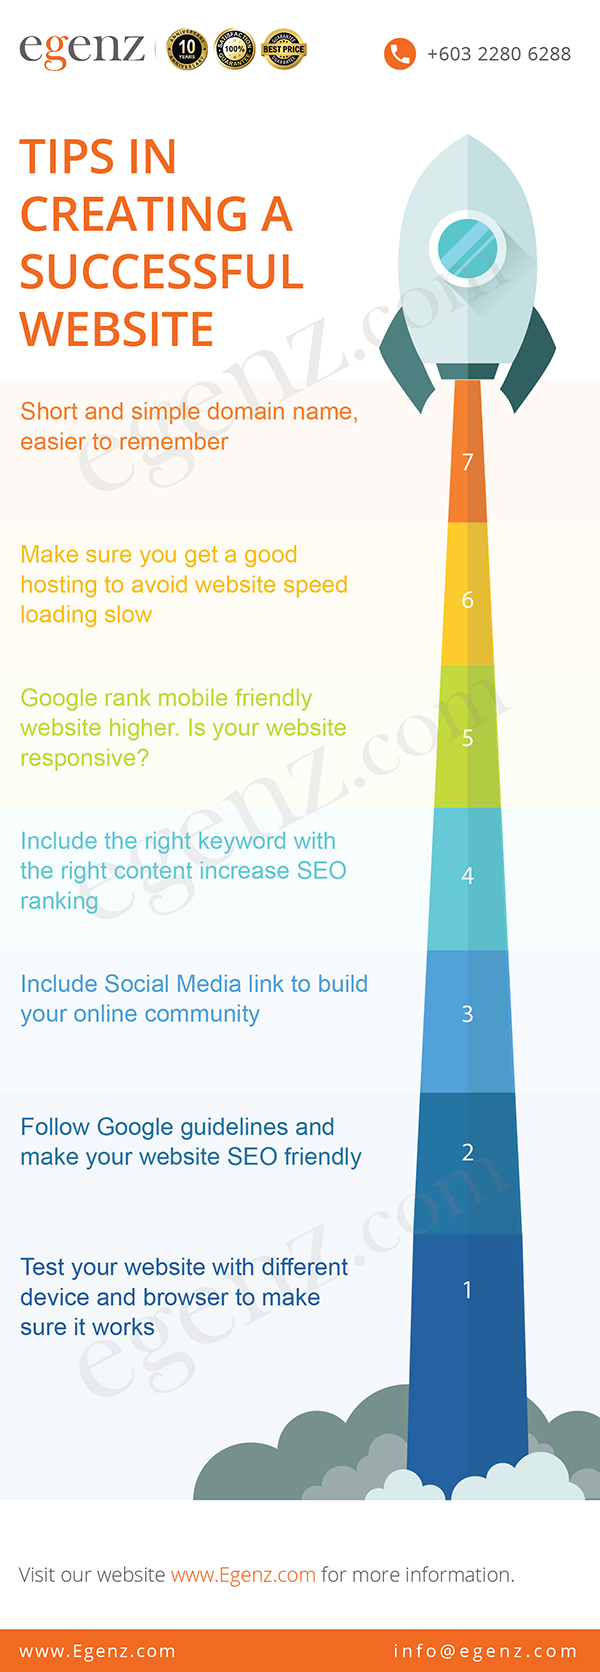 Infographic-Tips-In-Creating-A-Successful-Website-Mobile-Egenz.com